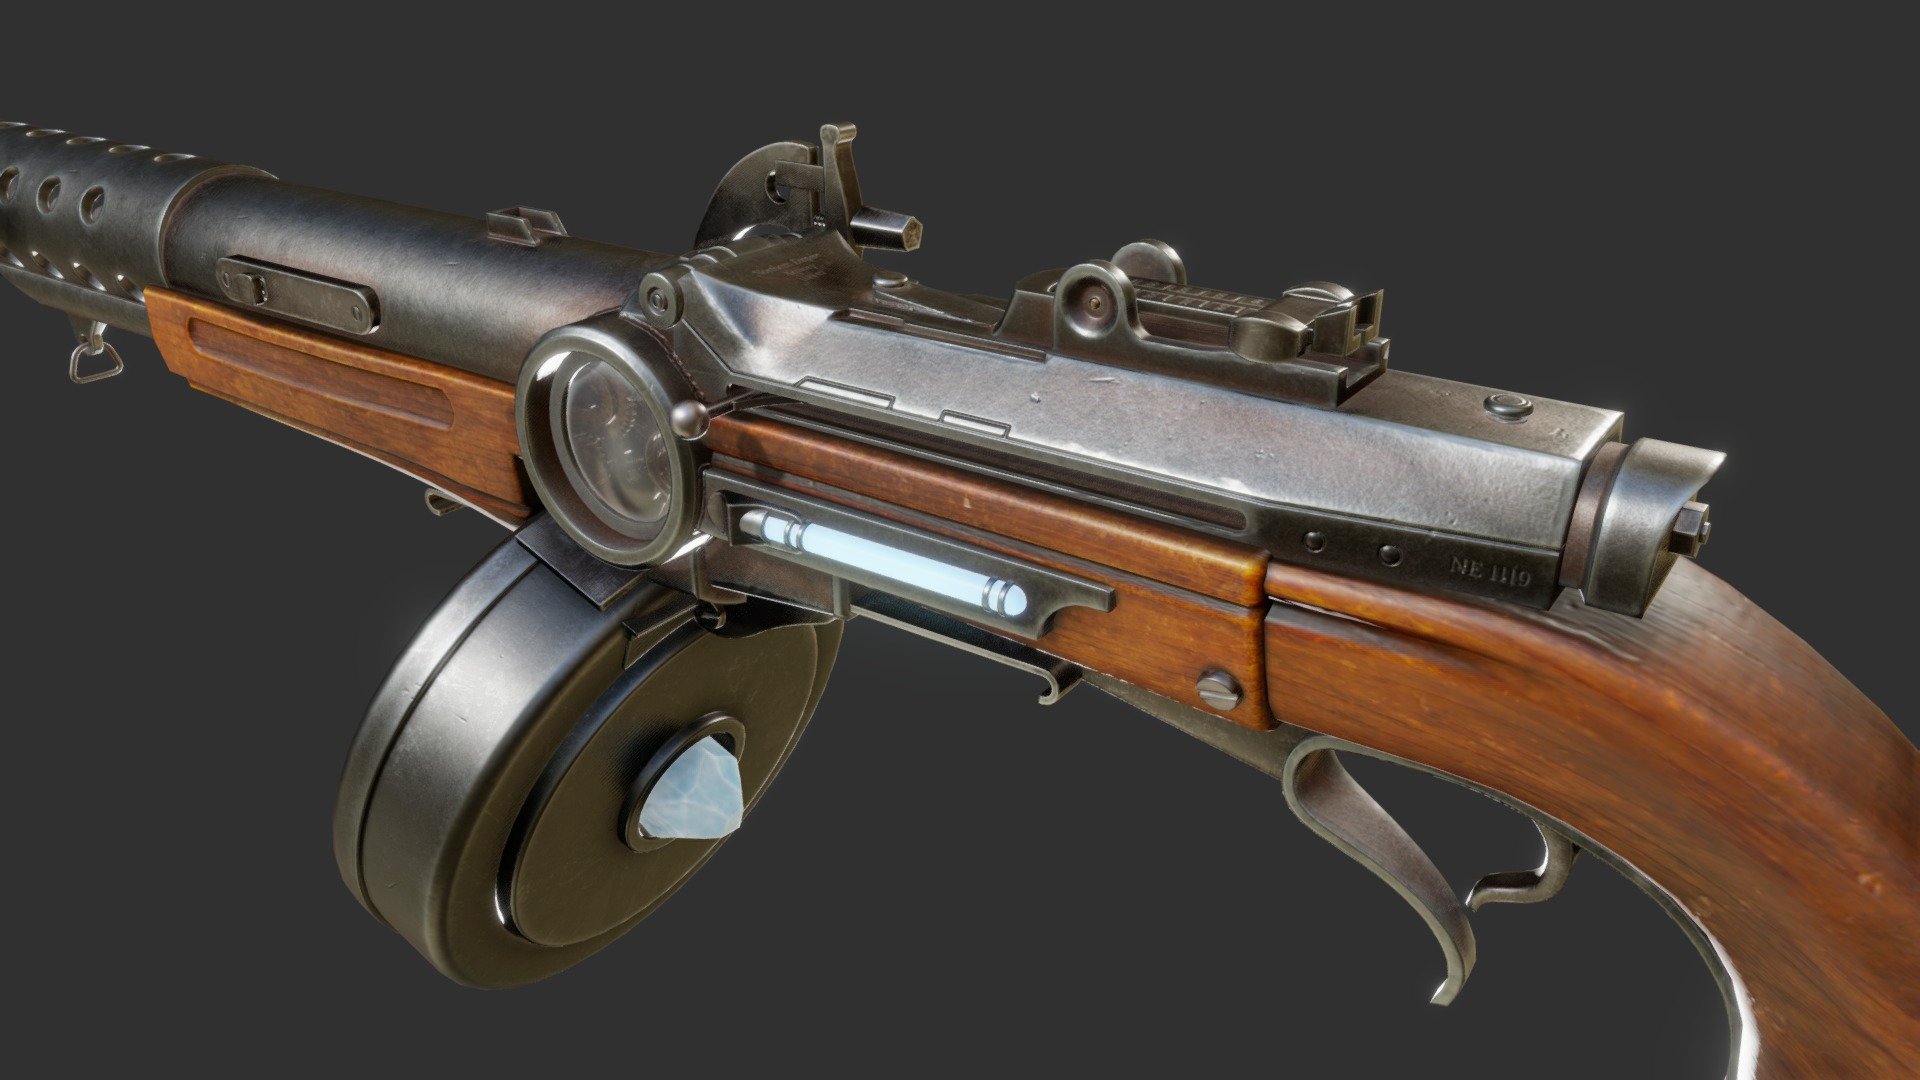 Info




Real world scaling.

7z file contains Blender, Unity, PBR and Unreal textures in 4K resolution.

Different texture sets for the main gun and the magazine.

The hammer, bolt and other several meshes are seperate objects for animation purposes. They all have the correct angle of rotation.

Description

I've had this weapon concept in my head forever and finally I decided to make it. The gem in the drum magazine powers the entire gun. The gun fires magical projectiles, somewhat like the Needler from Halo, but without the needle projectiles.



 - Flintlock Submachine Gun - Buy Royalty Free 3D model by Joe-Louis (@Dikkiedik) 3d model